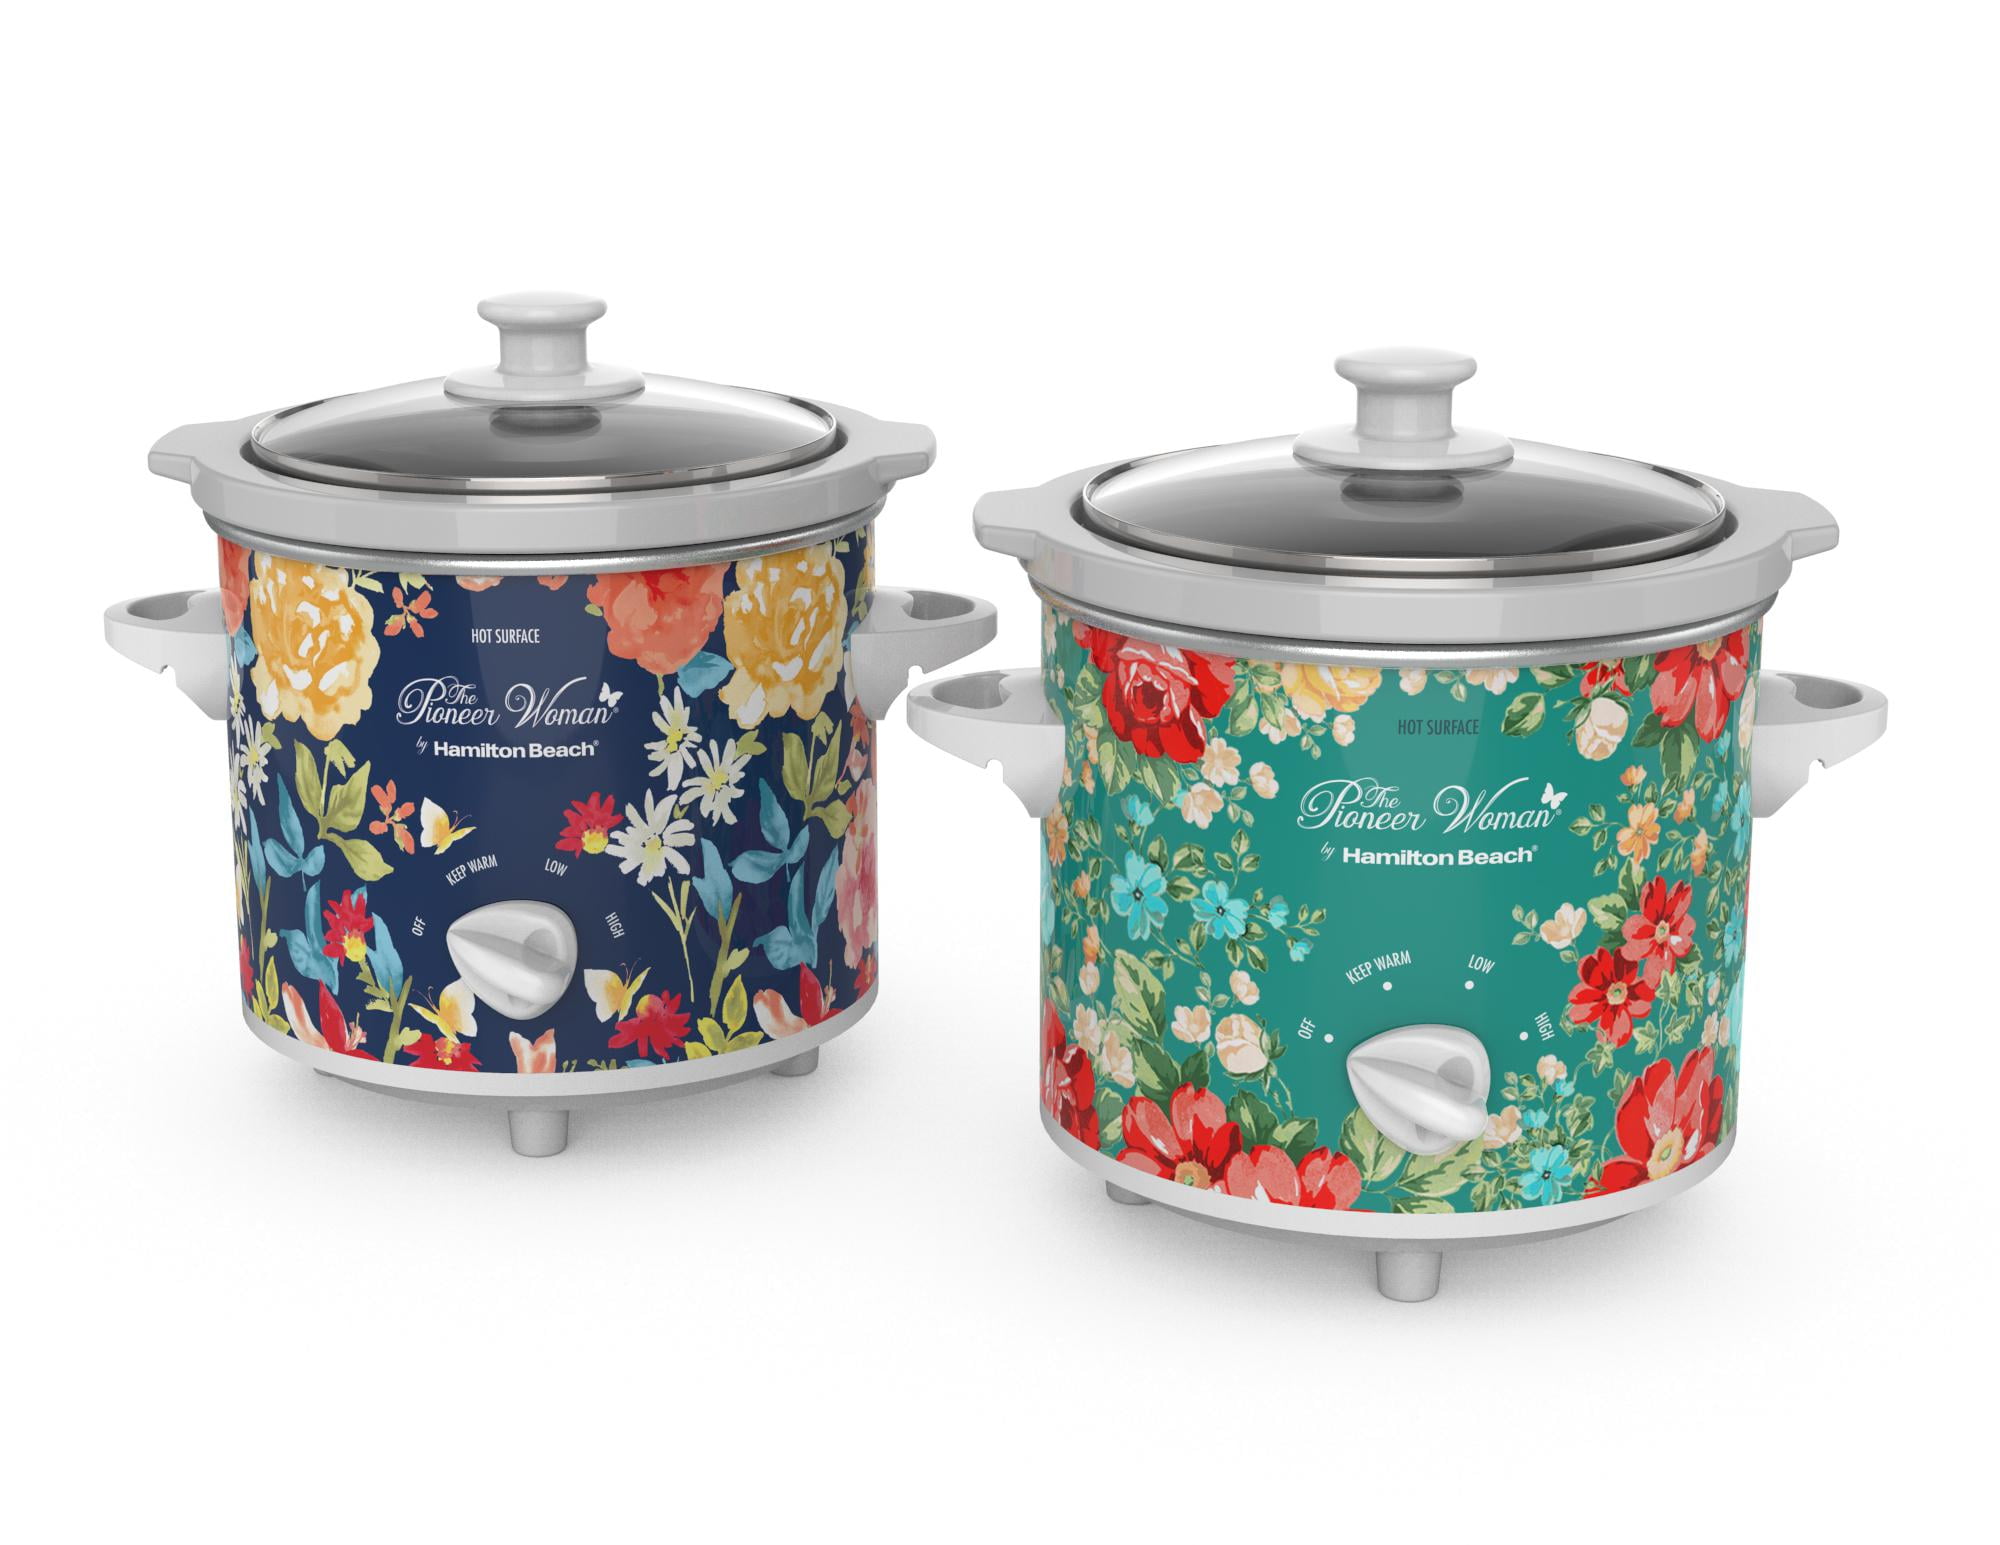 The Pioneer Woman Slow Cooker 1.5 Quart Twin Pack, Fiona Floral and Vintage Floral, 33016 - image 1 of 6